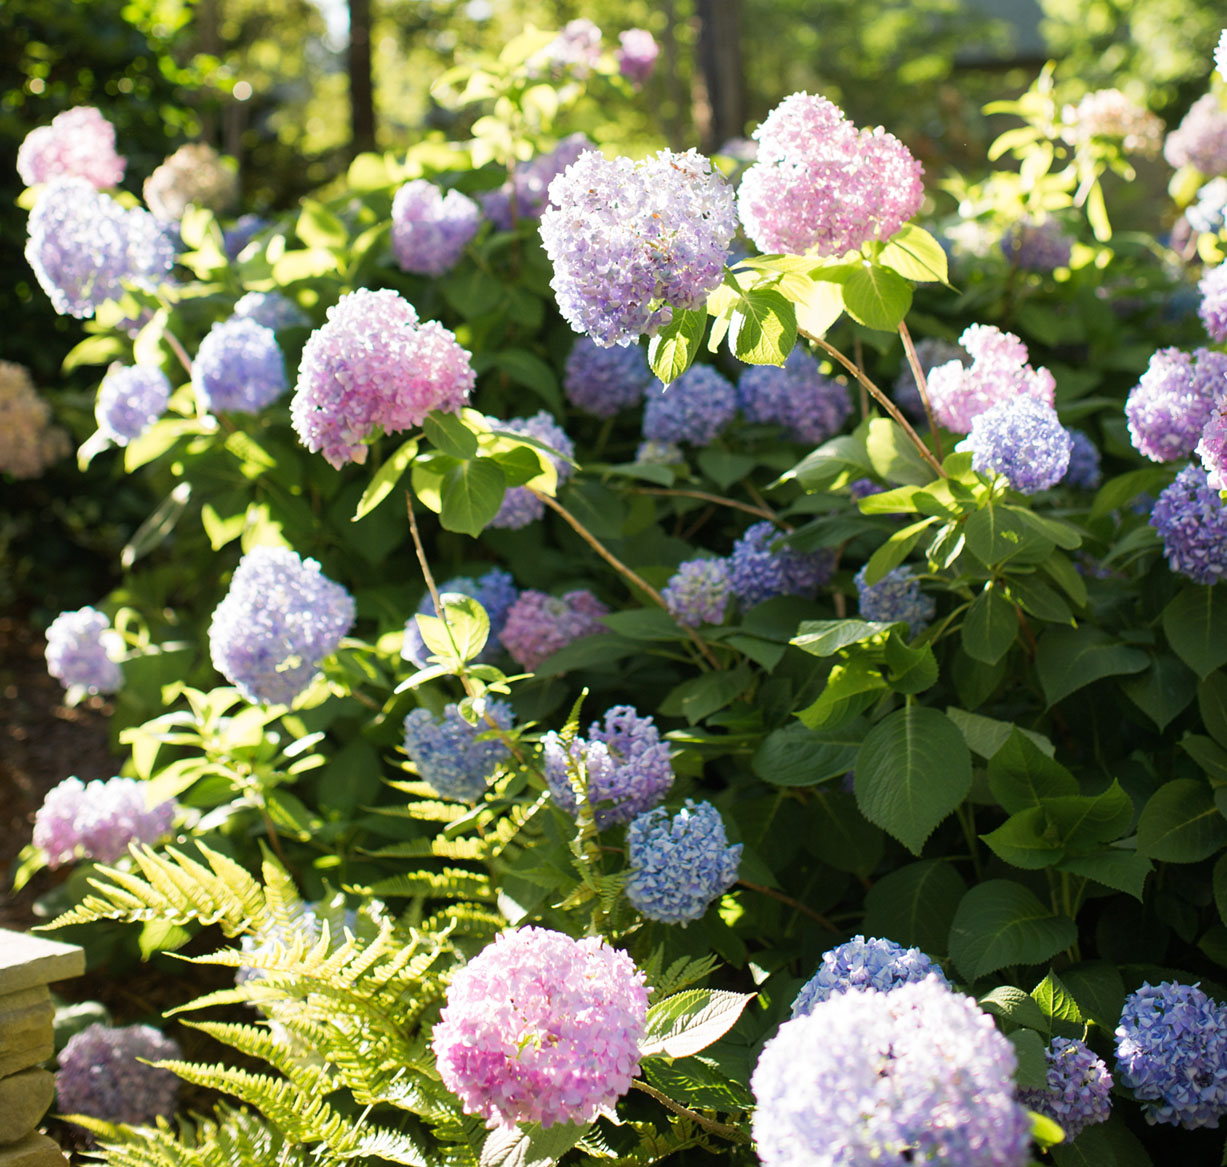 pink and purple hydrangeas bloom in the spring sun